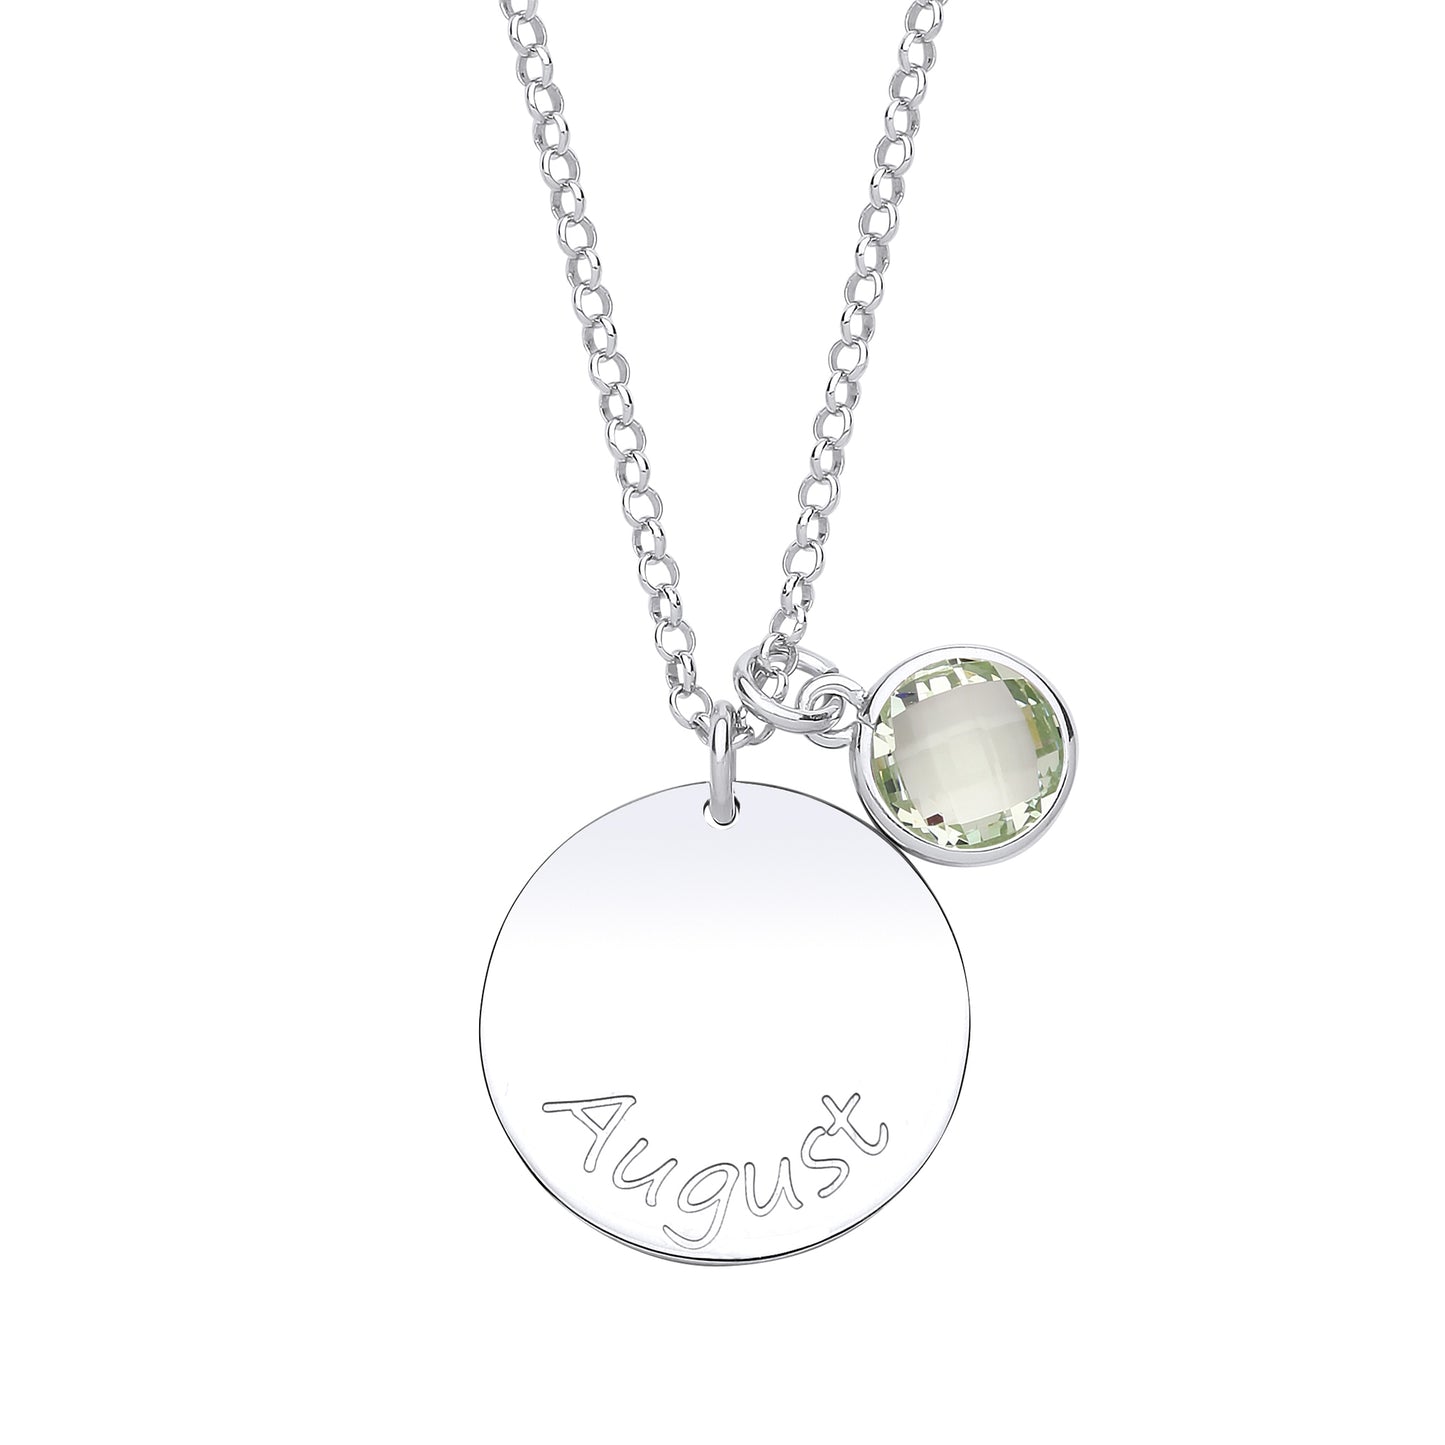 Silver  Lt. Green CZ Birthstone August Round Tag Necklace 16" 20mm - GVK306PER